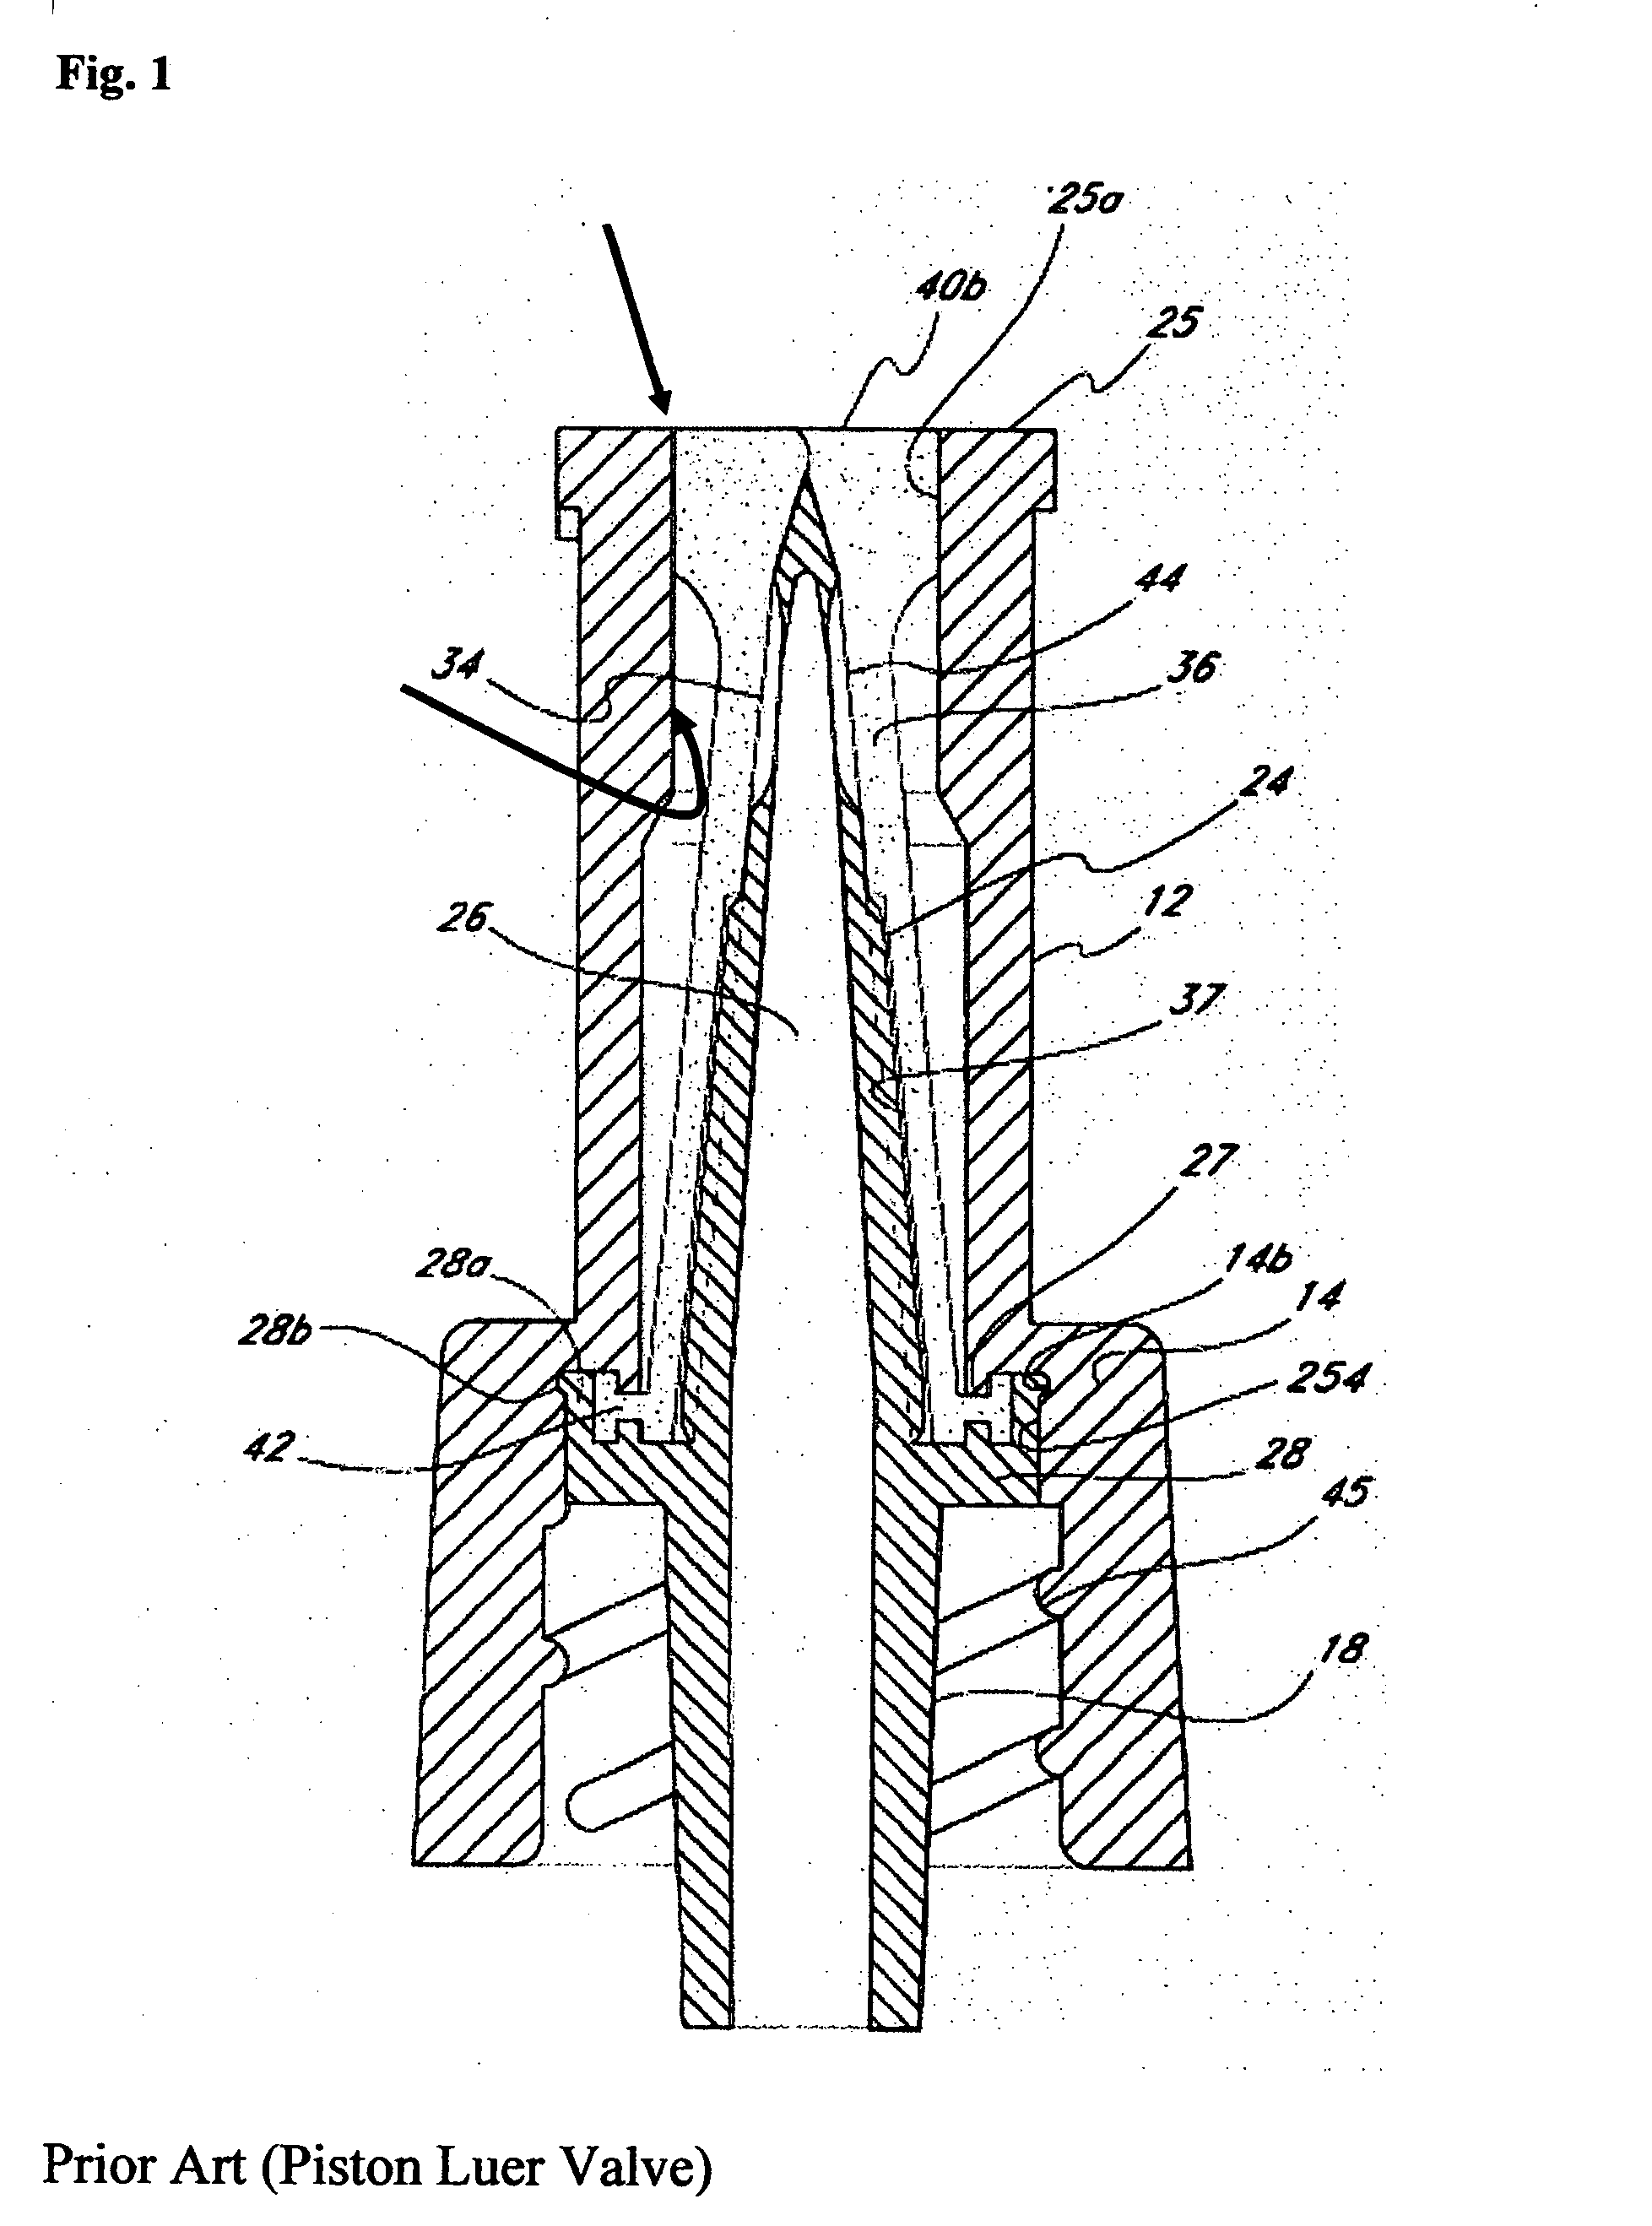 Mechanically anti-infective access system and method